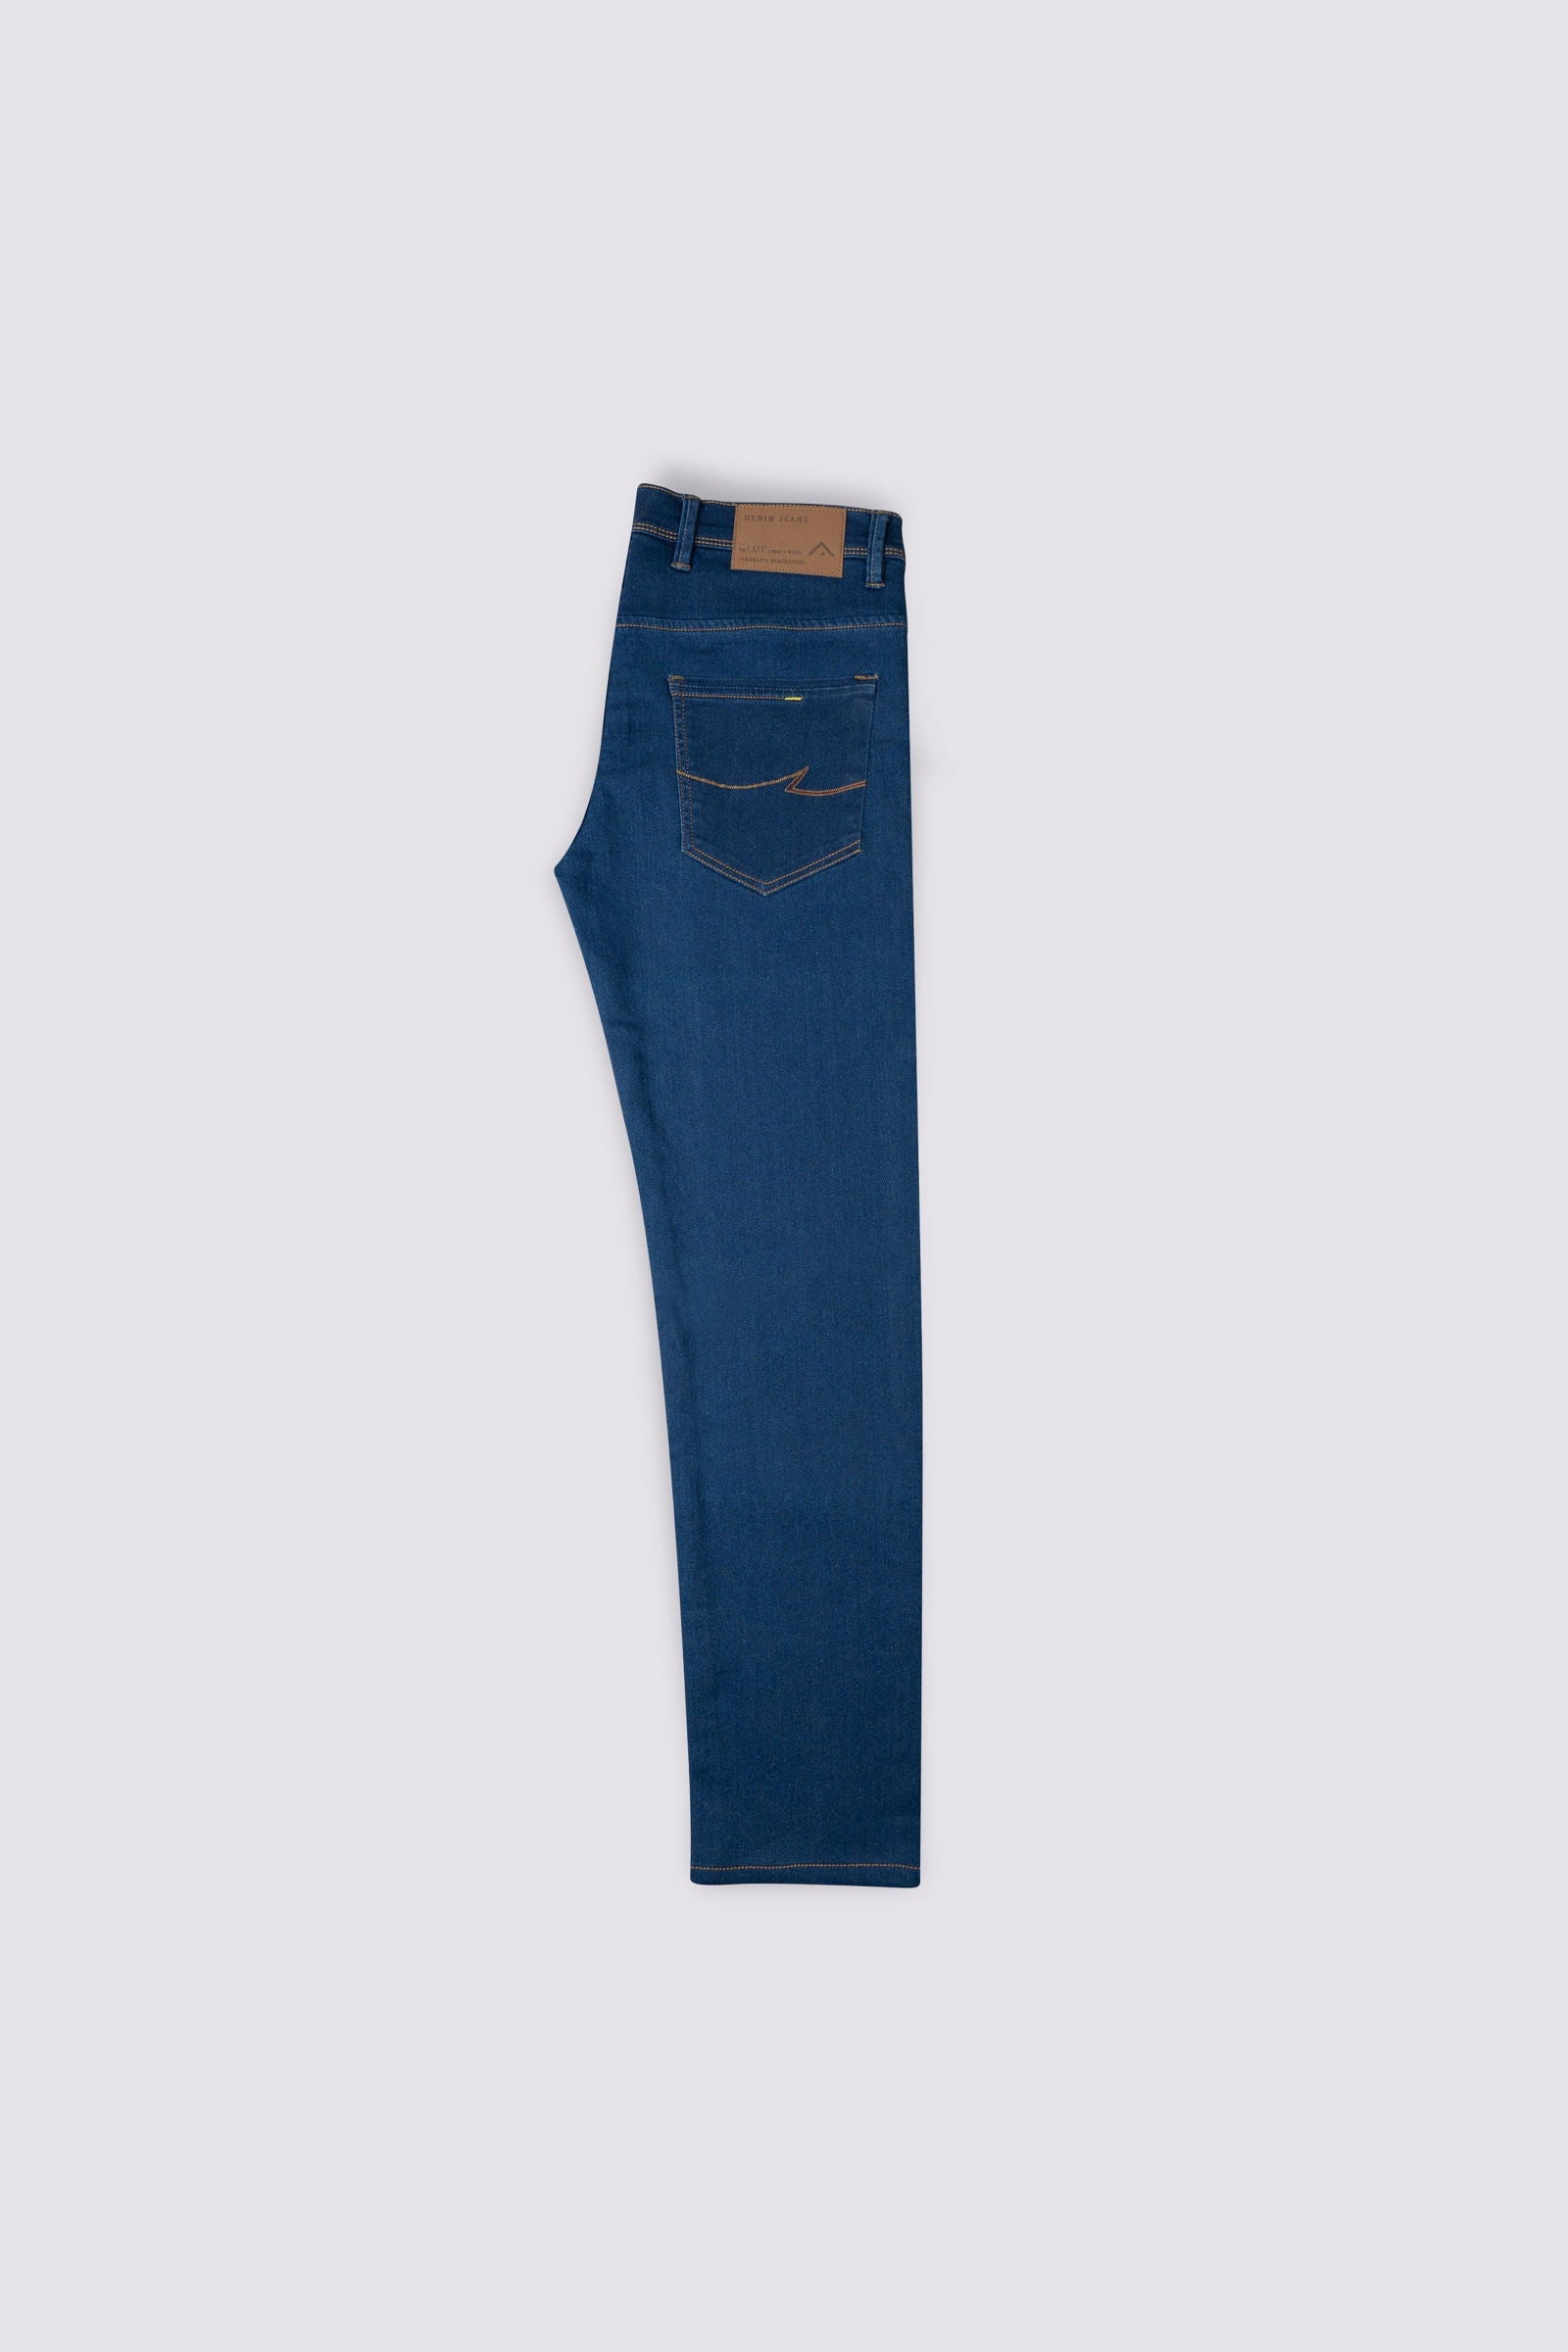 Power Stretch Royal Blue Jeans - The Axis Clothing